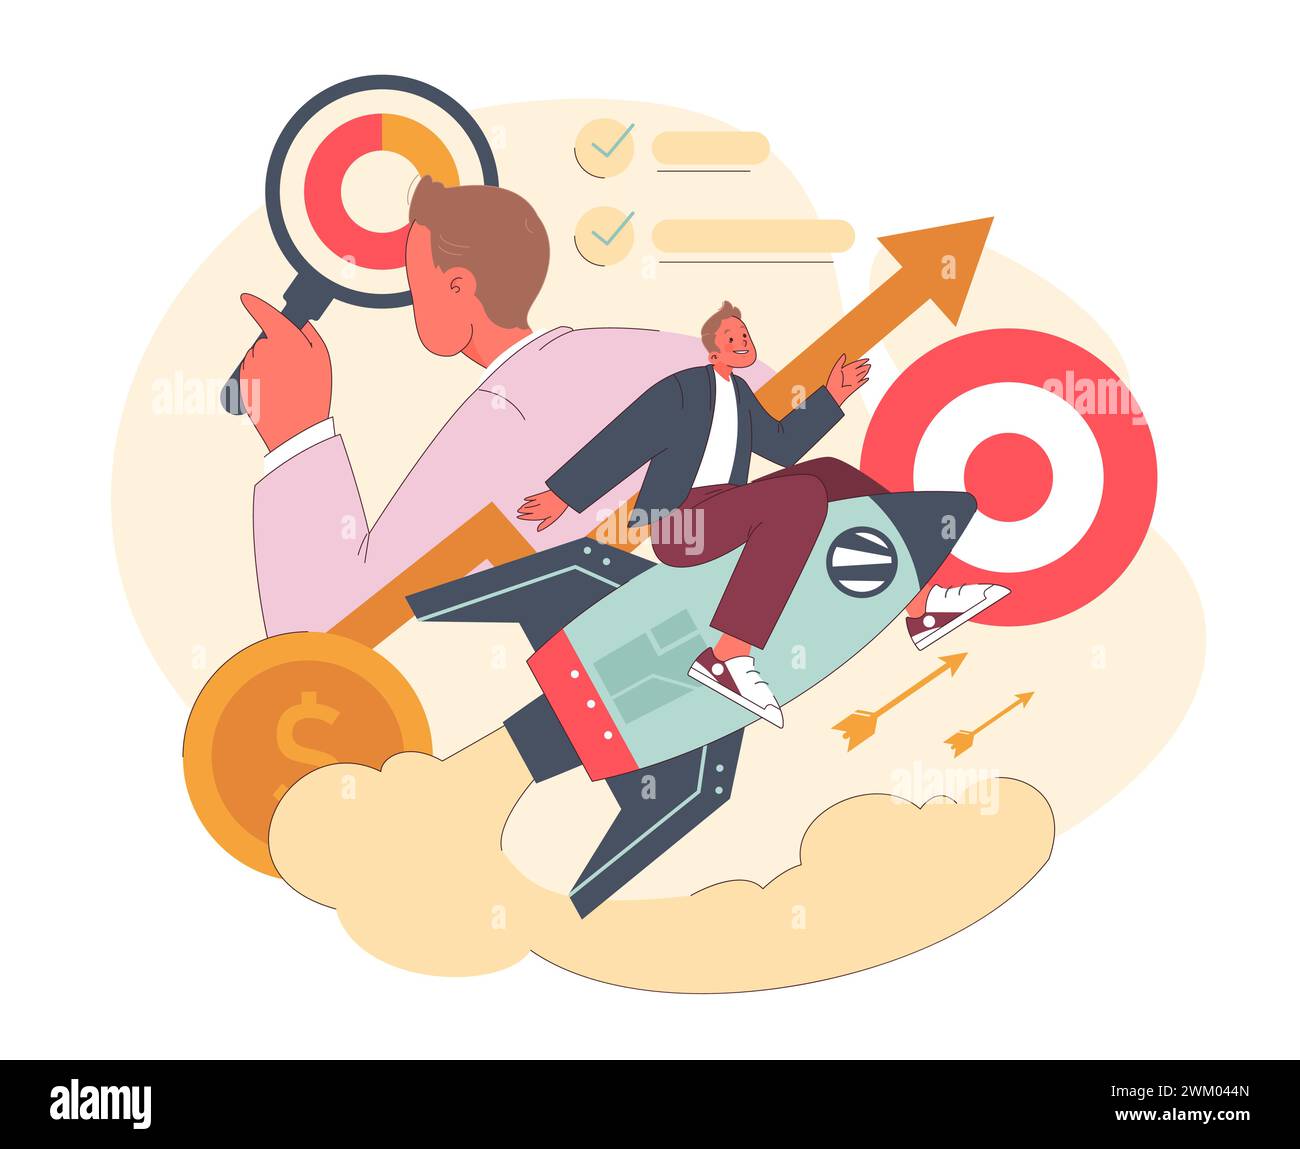 Career Advancement concept. Ambitious professional zooming in on targets while riding a rocket, symbolizing aspiration, achievement, and swift growth in the corporate world. Flat vector illustration. Stock Vector